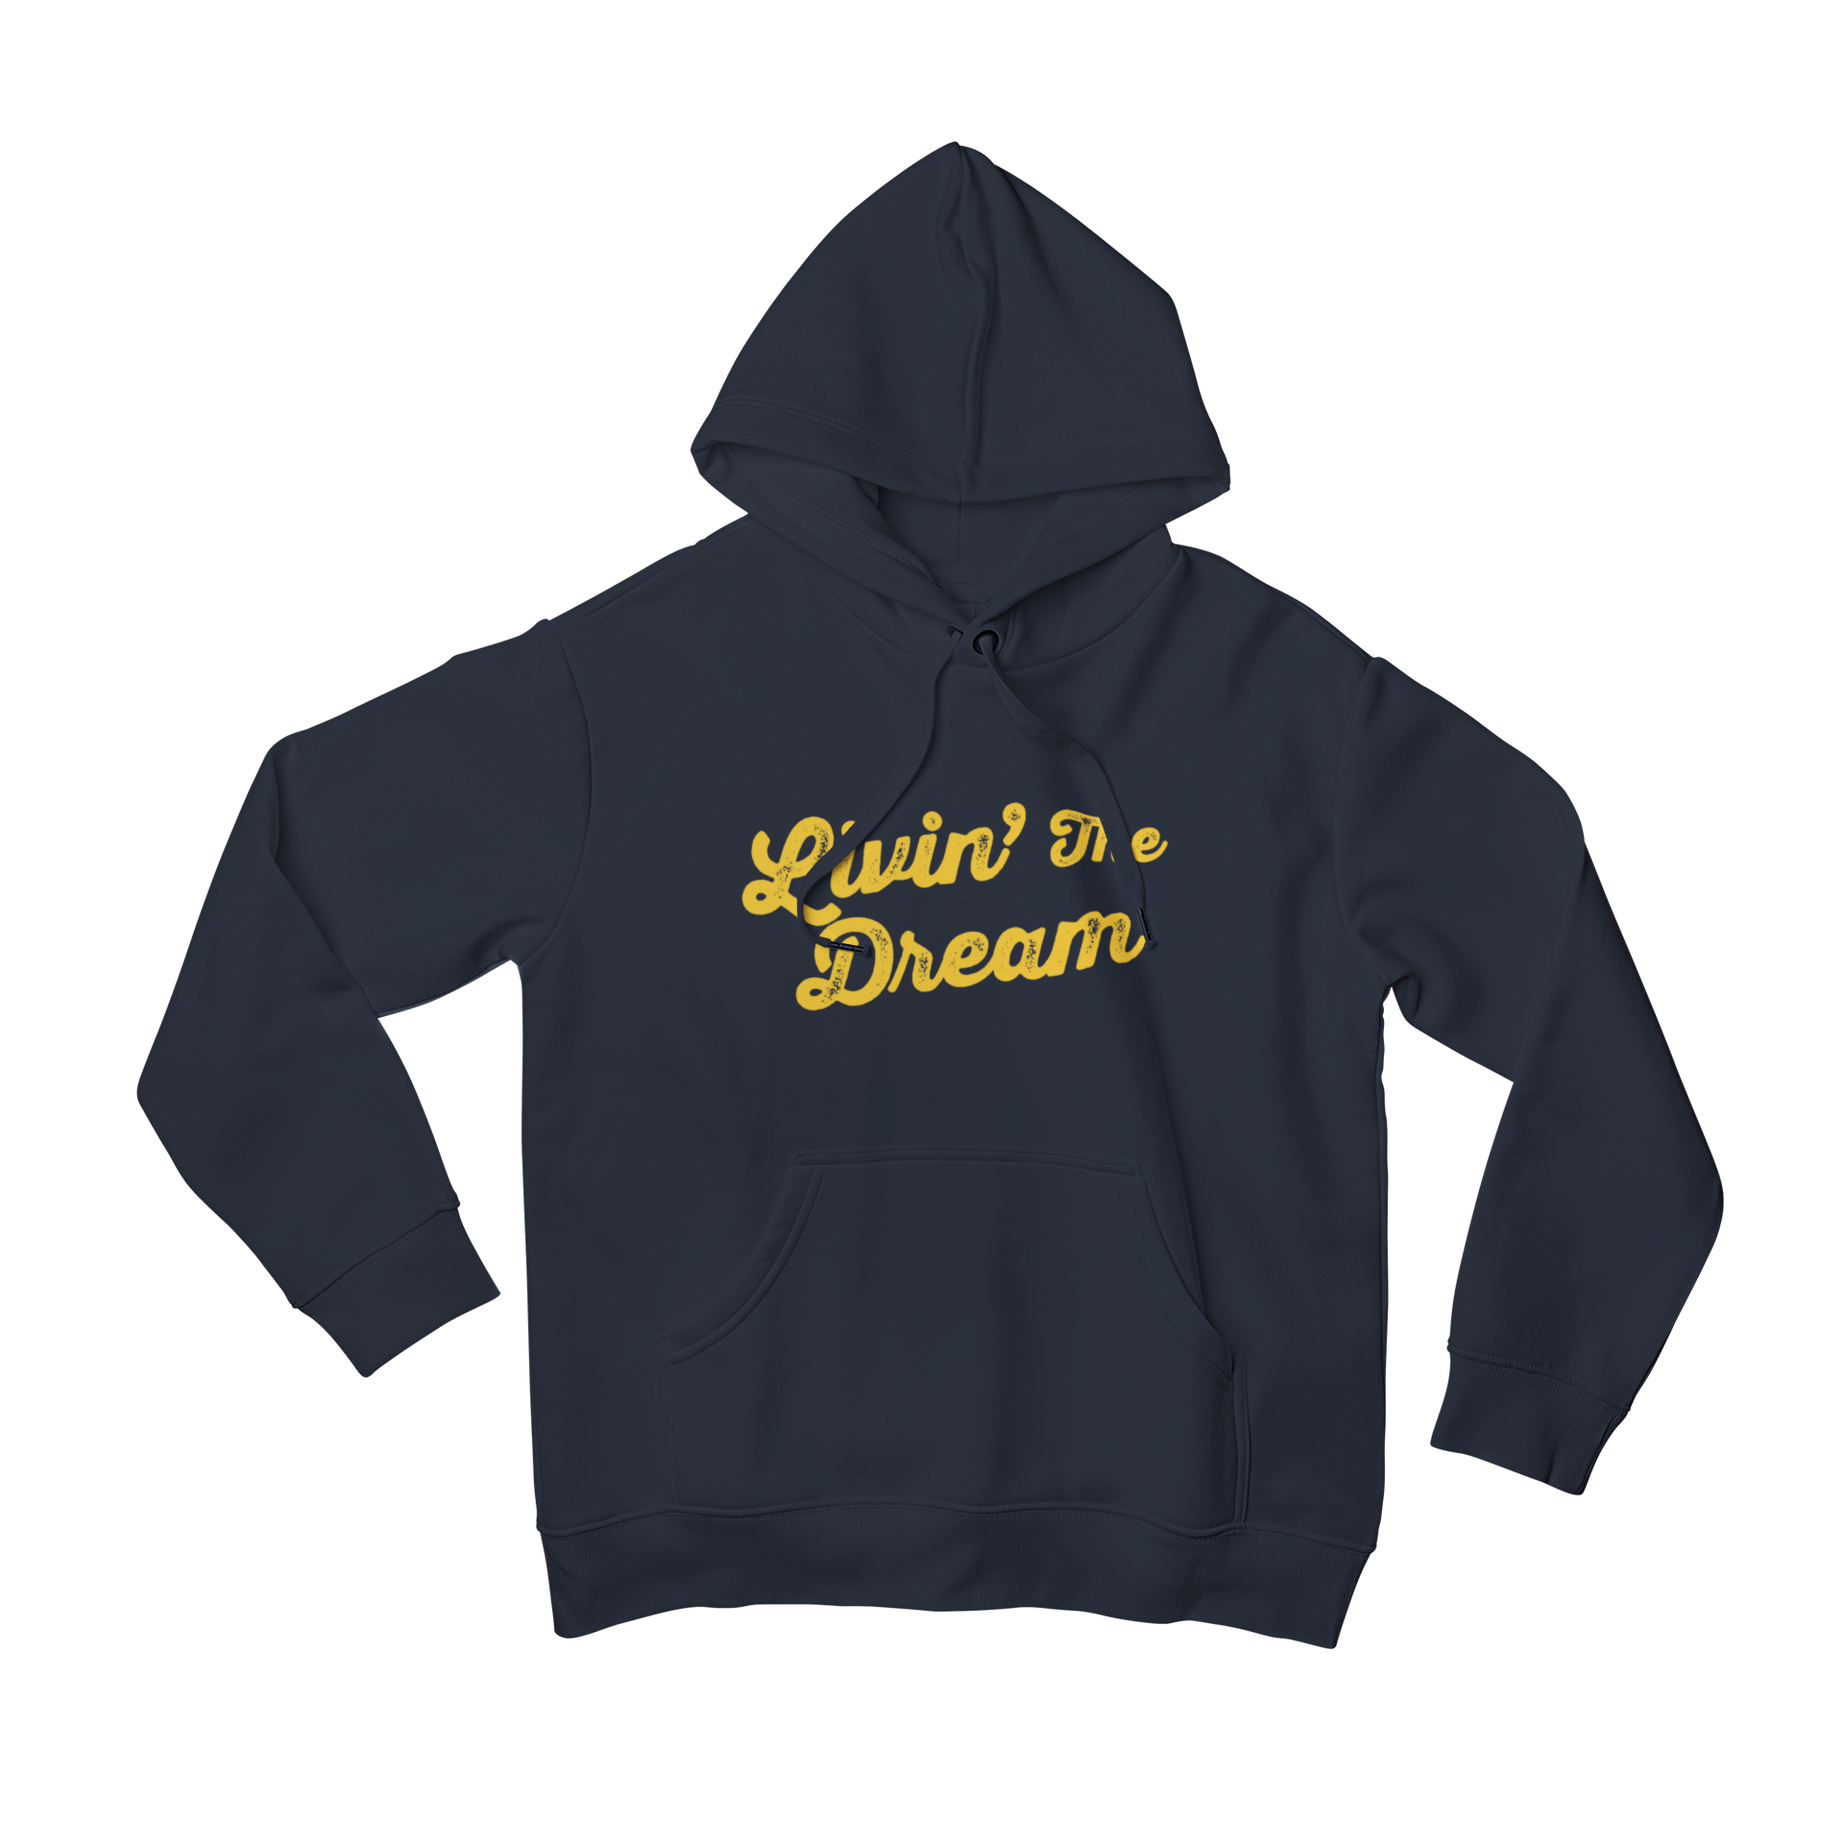 Livin The Dream in this Front Print Hoodie. Stay cozy and stylish while keeping your dreams alive with this quirky slogan hoodie. Perfect for anyone who doesn't take themselves too seriously and loves a good play on words.